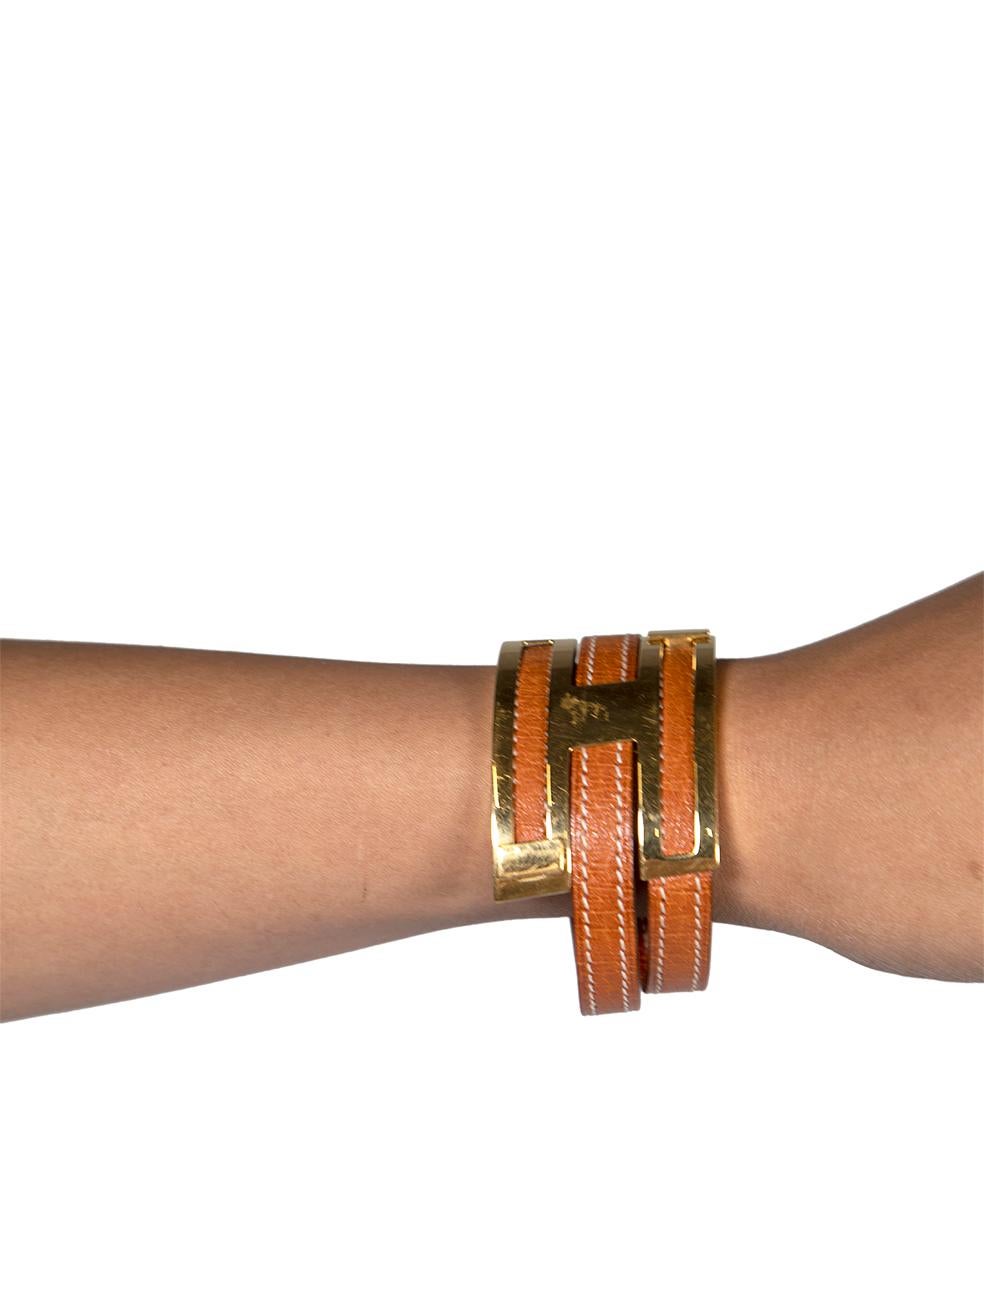 CONDITION is Very good. Minimal wear to bracelet is evident. Minimal wear to gold hardware with scratches on this used Hermès designer resale item.
 
 
 
 Details
 
 
 2001
 
 Vintage
 
 Model: Pousse Pousse
 
 Gold on Gold
 
 Chevre Mysore leather
